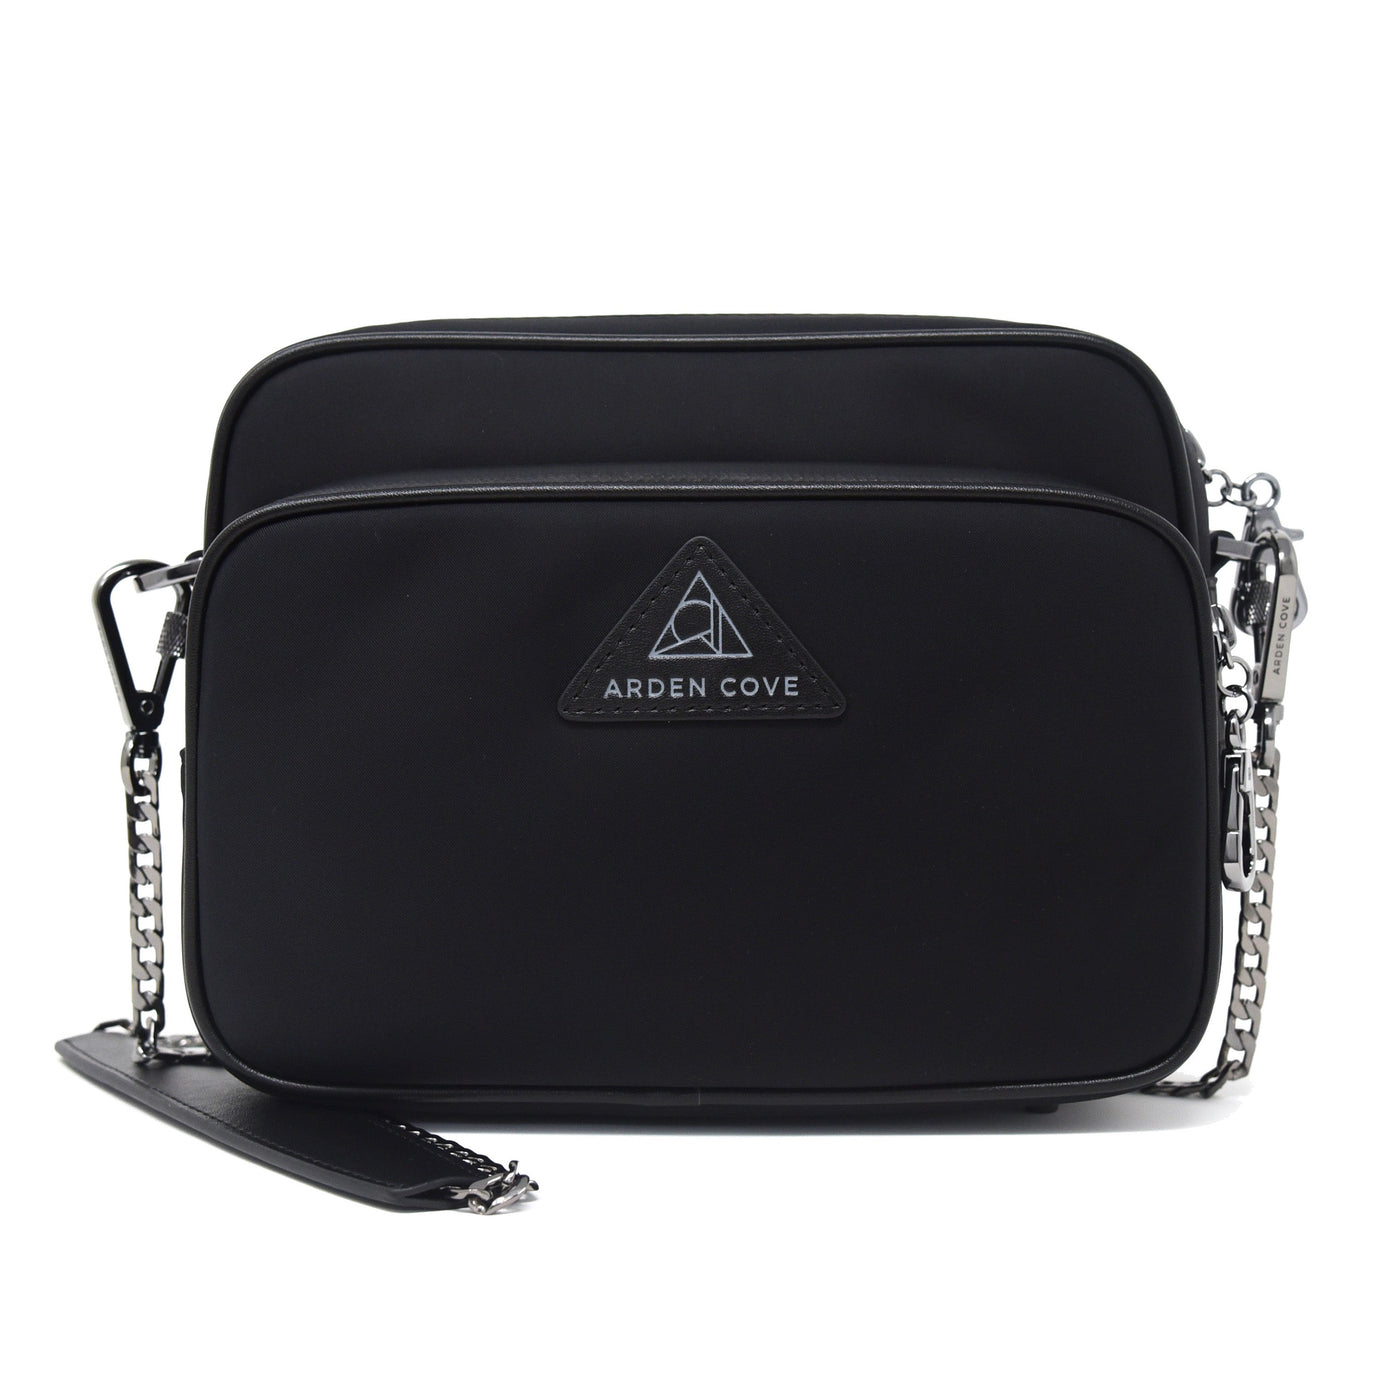 Anti-theft Water-resistant Travel Crossbody - Crissy Full Crossbody in Black Gunmetal with slash-resistant chain & locking clasps straps - front view - Arden Cove